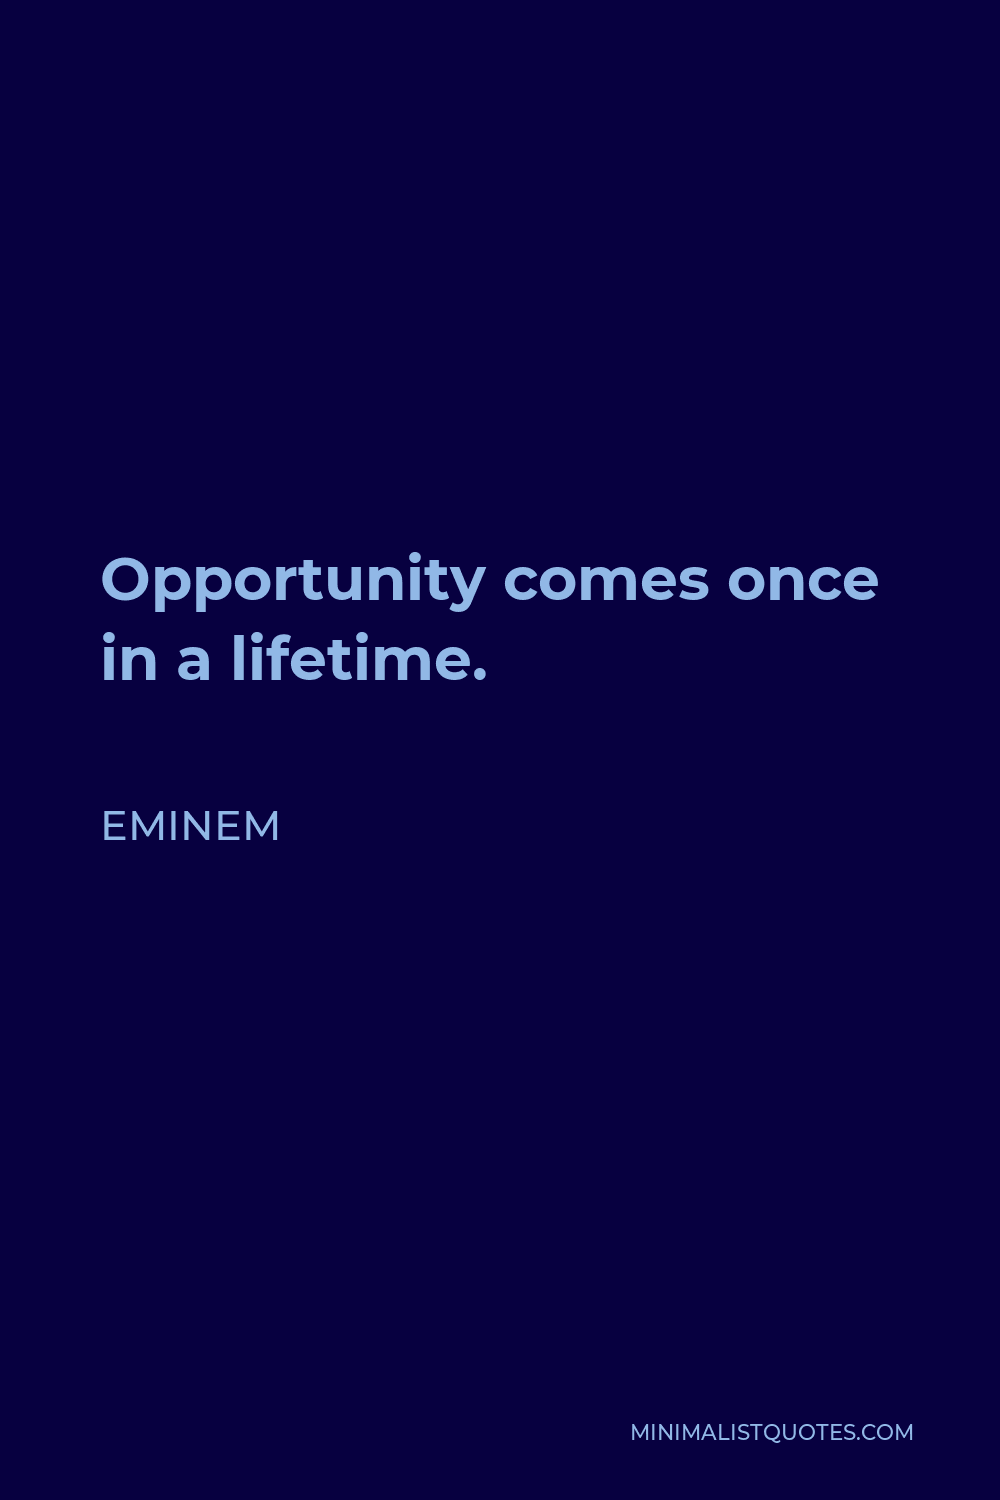 Eminem Quote - Opportunity comes once in a lifetime.